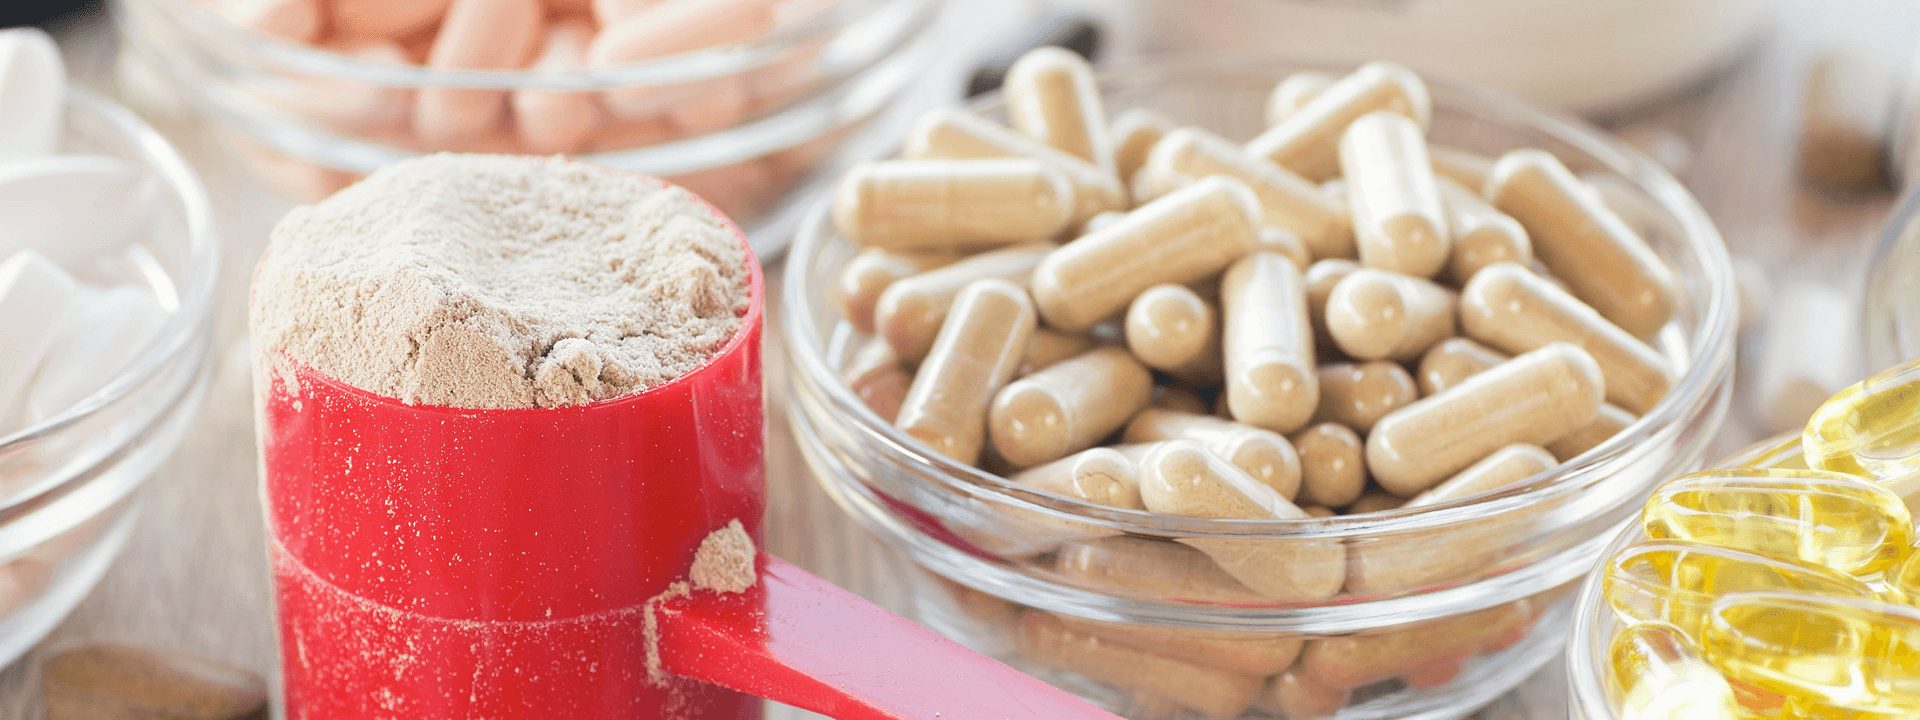 Do supplements make your body nutritionally lazy?